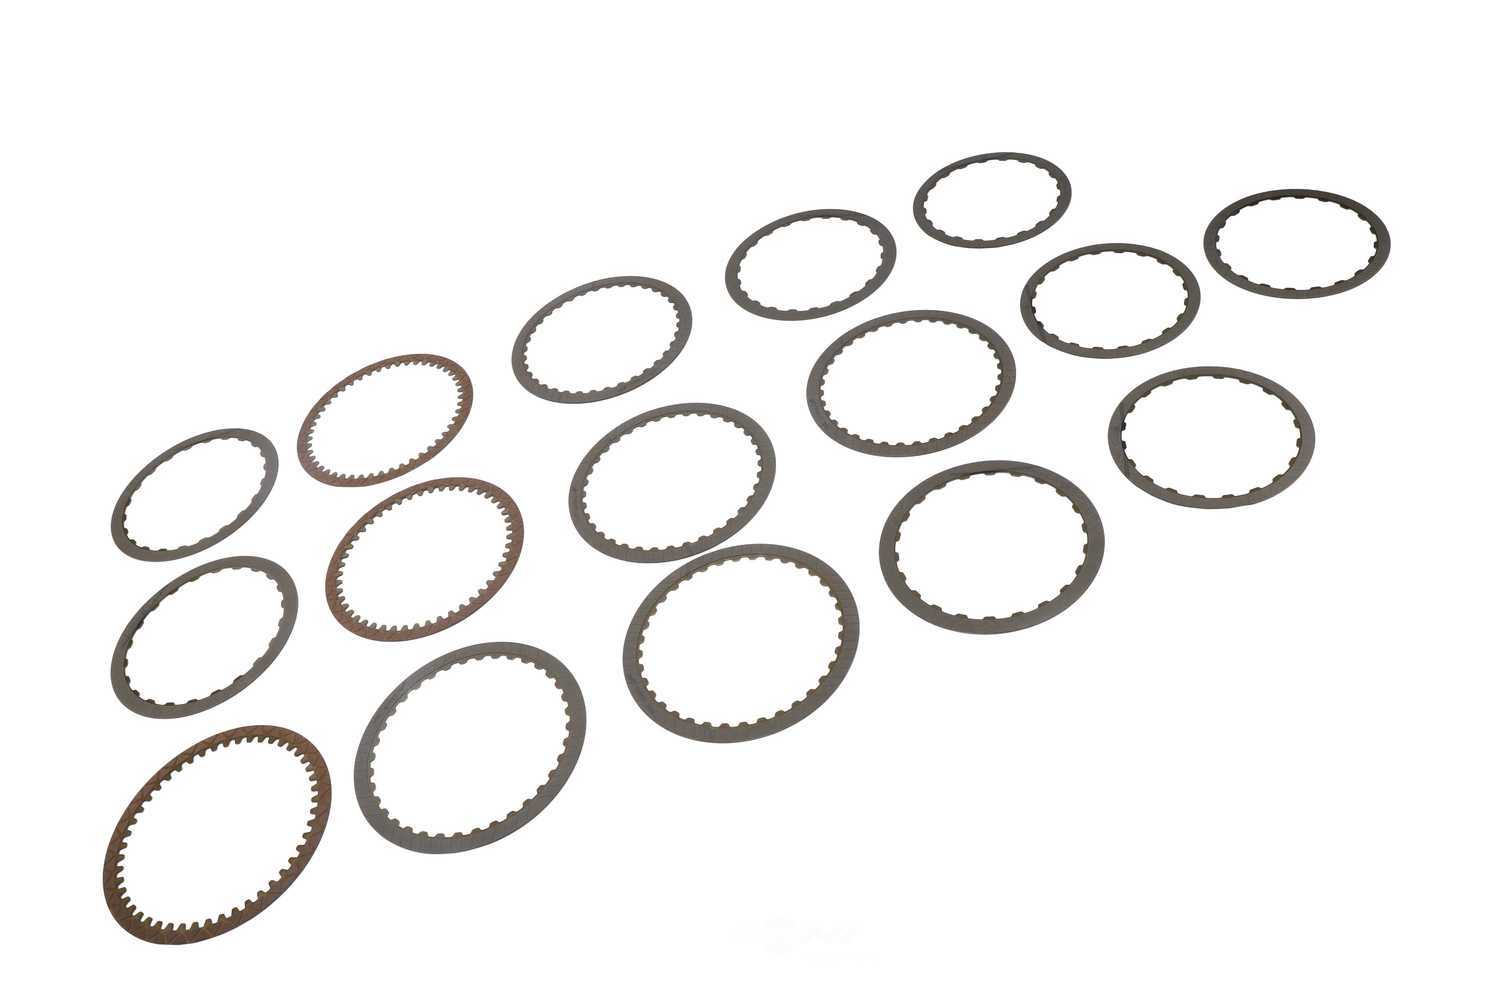 GM GENUINE PARTS - Transmission Clutch Friction Plate Kit - GMP 24277829